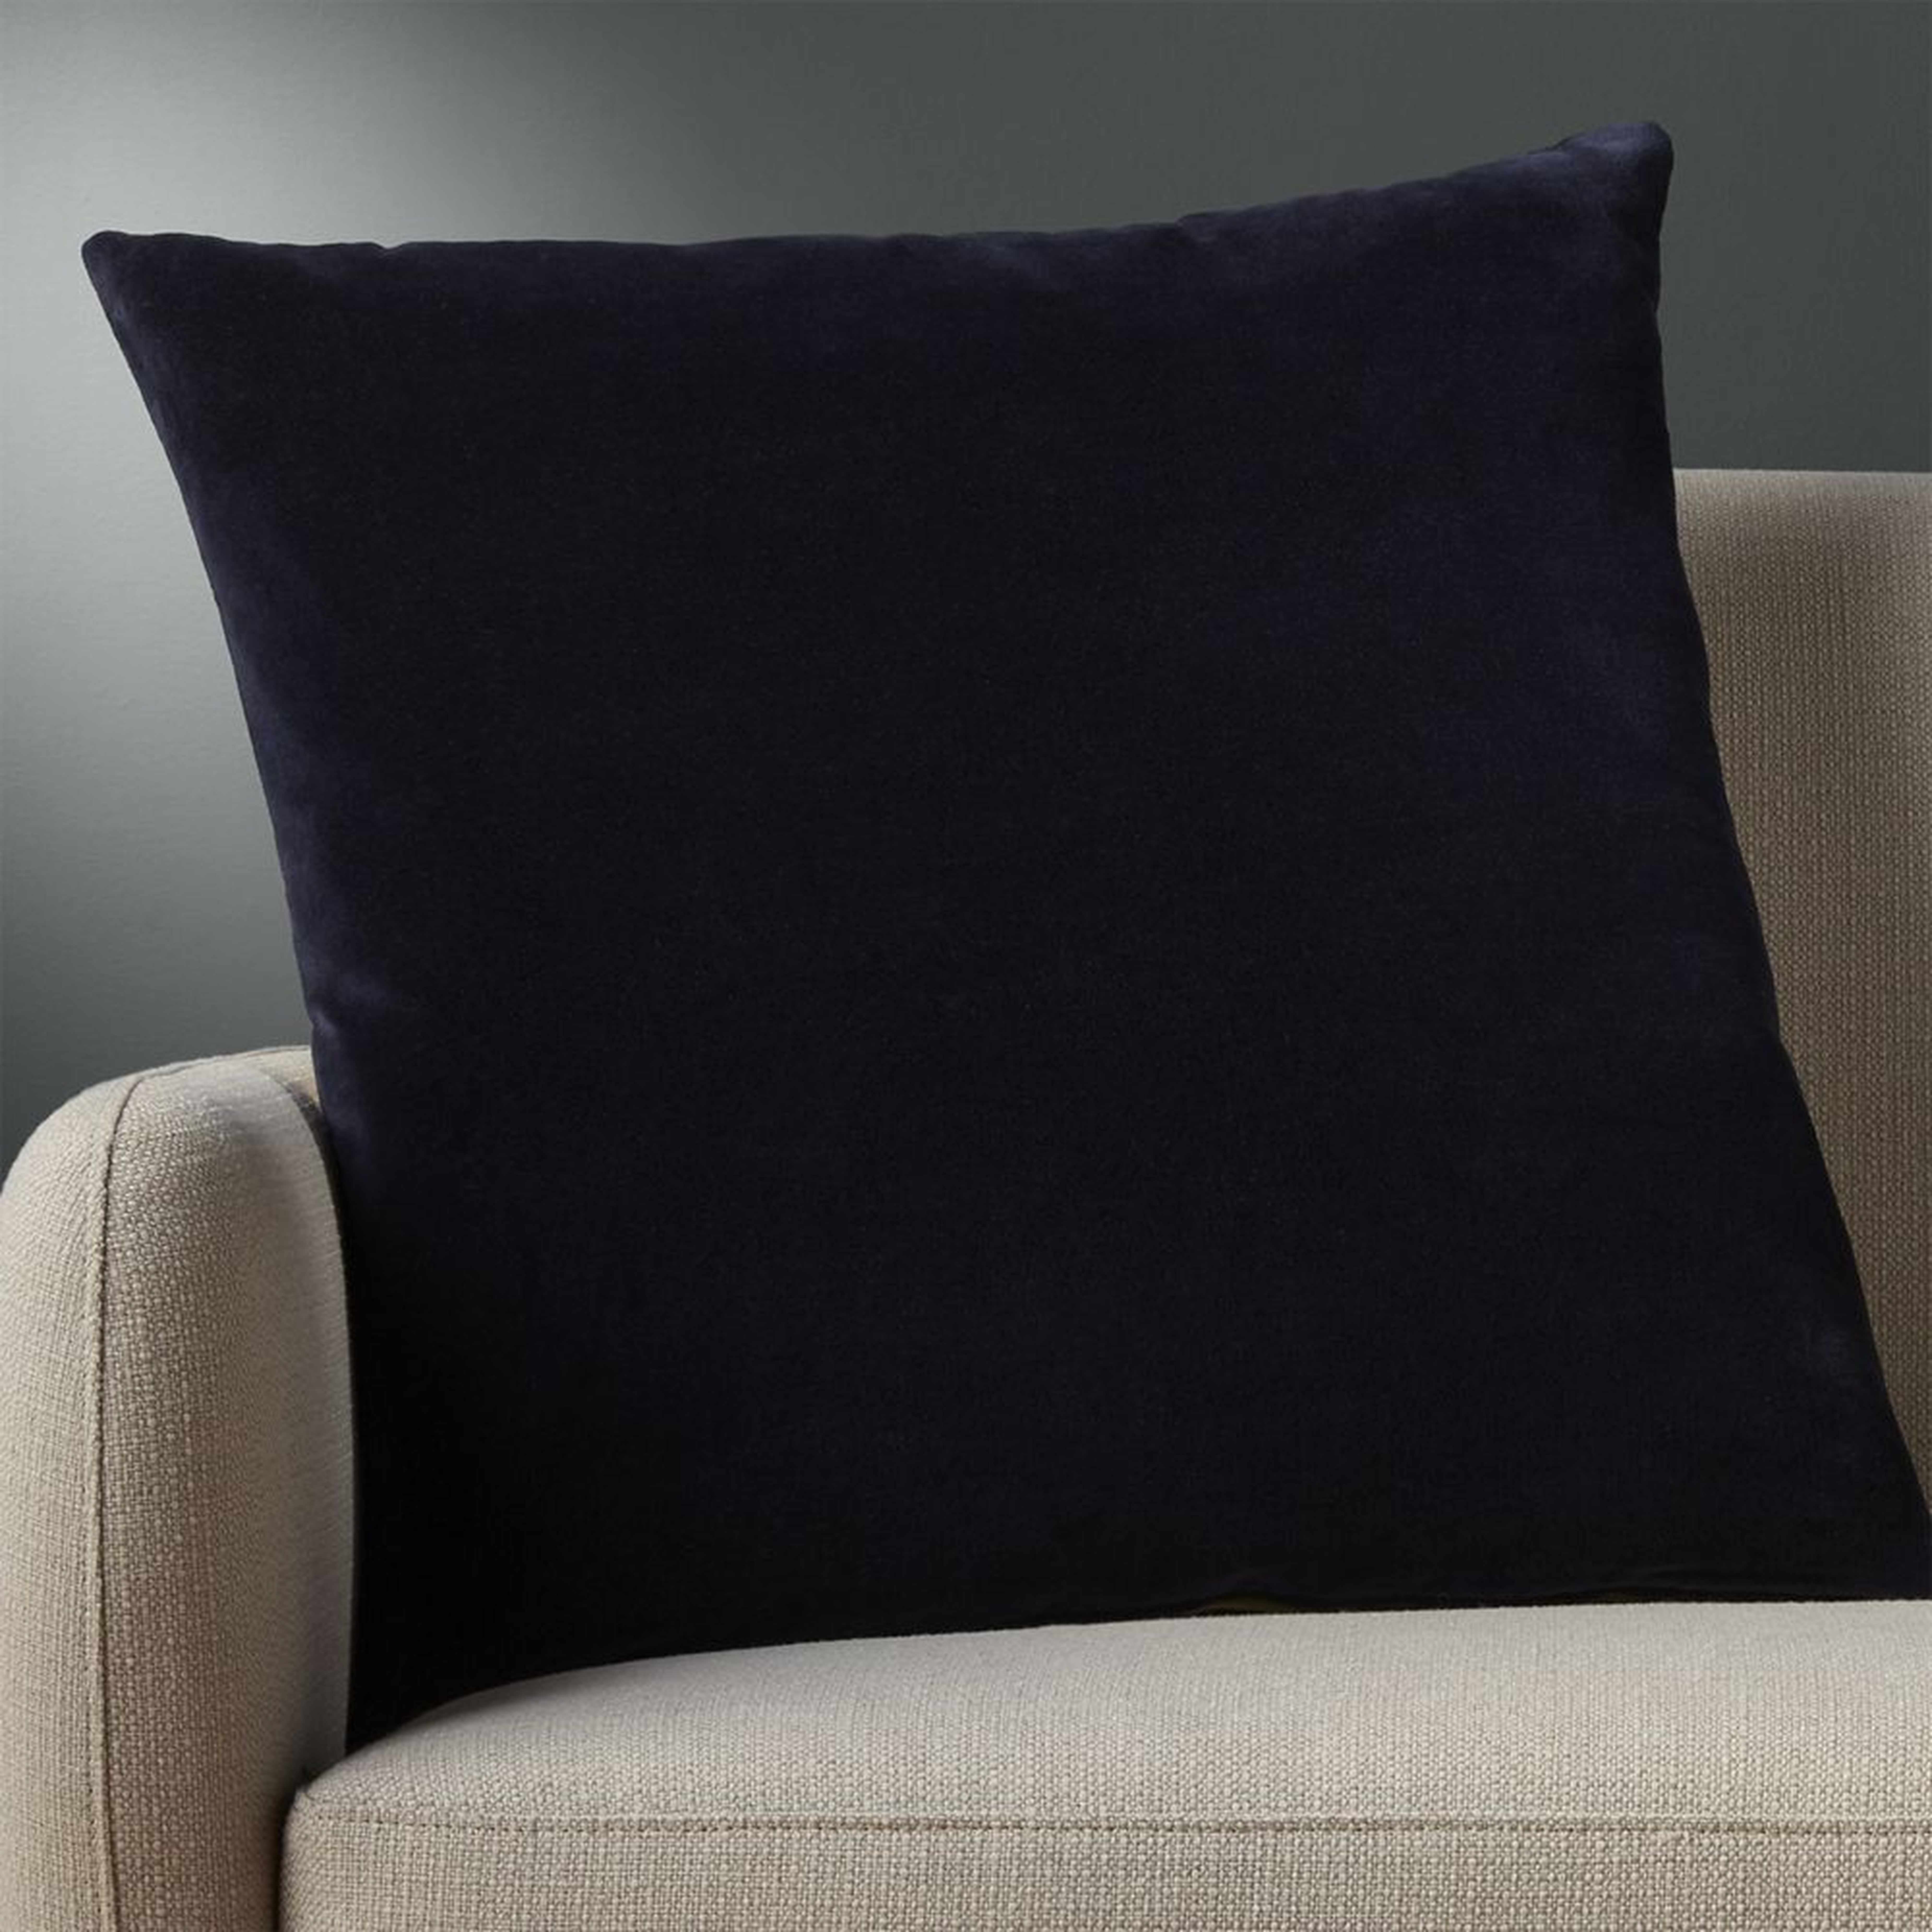 "23"" leisure navy pillow with feather-down insert" - CB2